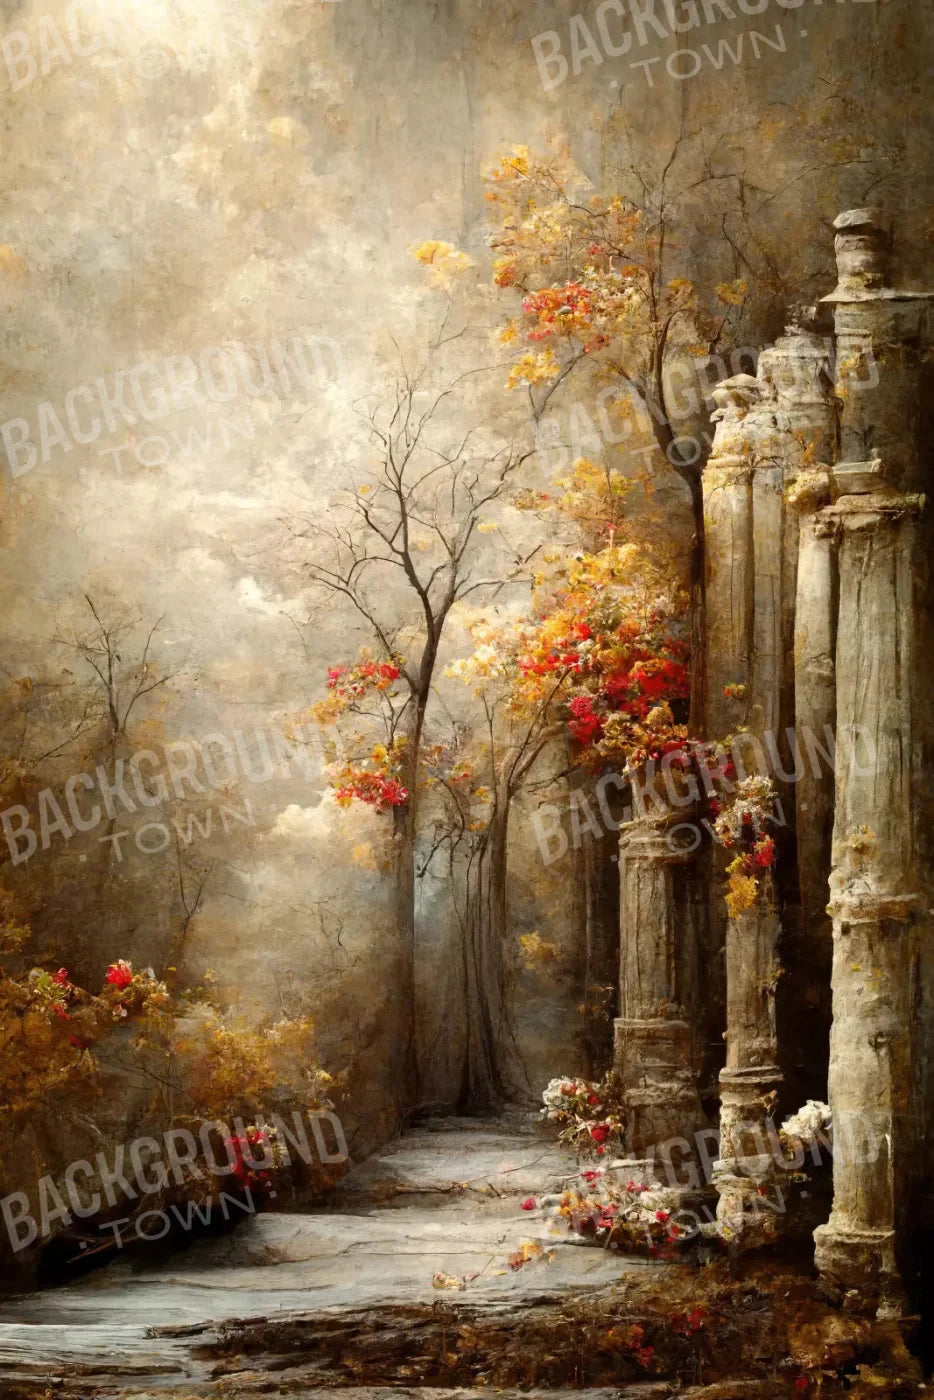 Autumn Dream for LVL UP Backdrop System